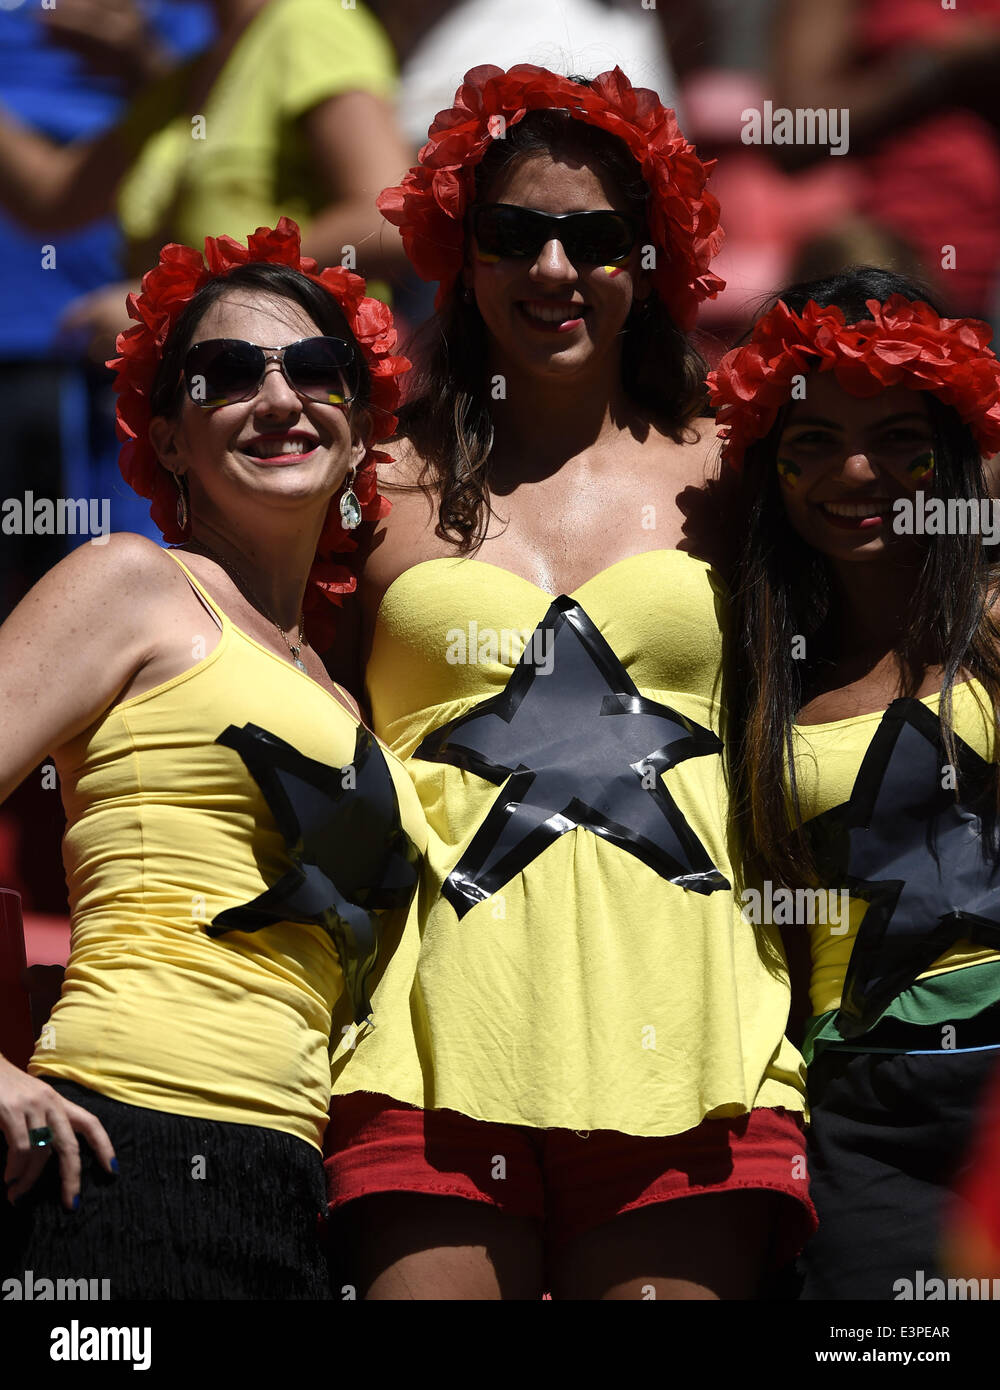 Brasilia, Brazil. 26th June, 2014. Ghana's fans cheer prior to a Group G match between Portugal and Ghana of 2014 FIFA World Cup at the Estadio Nacional Stadium in Brasilia, Brazil, June 26, 2014. © Qi Heng/Xinhua/Alamy Live News Stock Photo